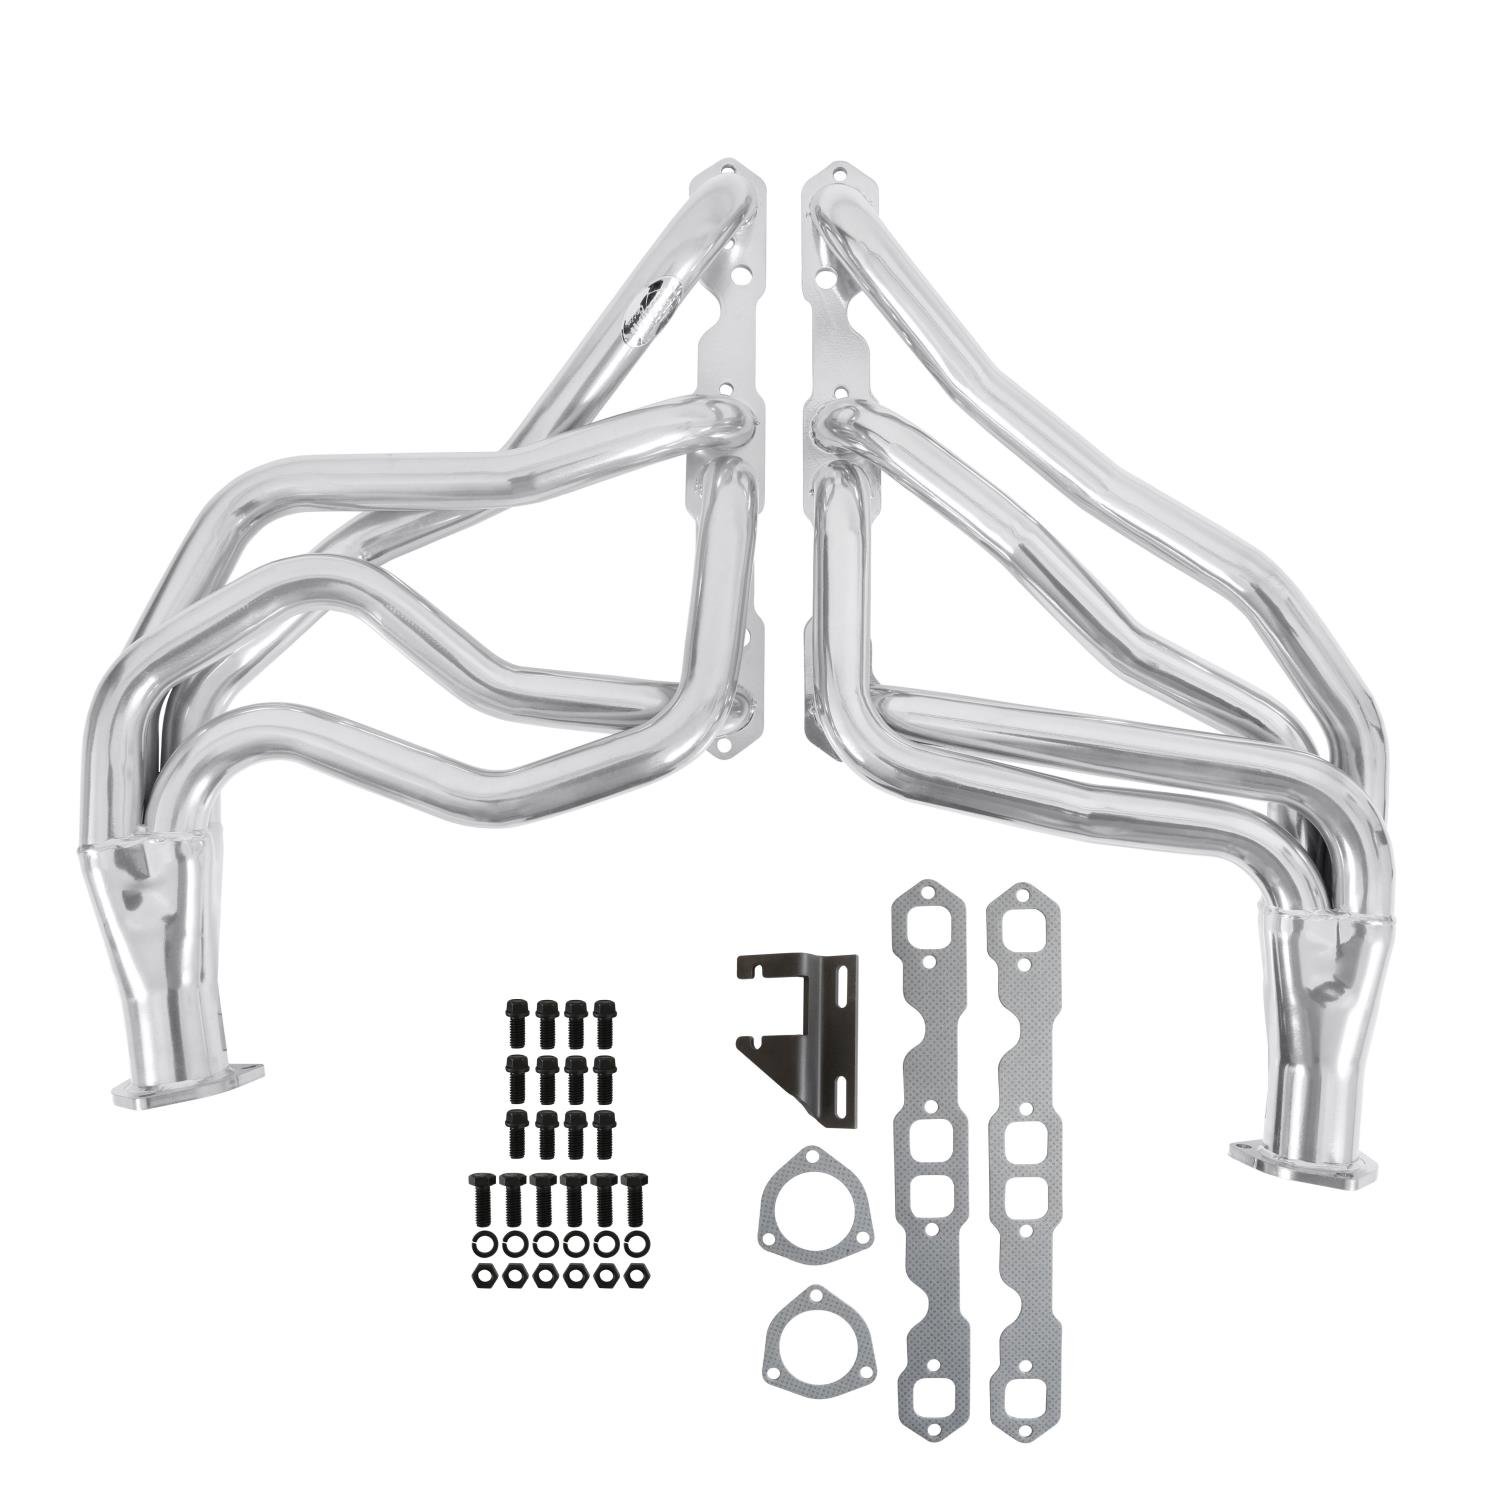 2453-1 Competition Long Tube Headers 265-400 Chevy Small Block V8